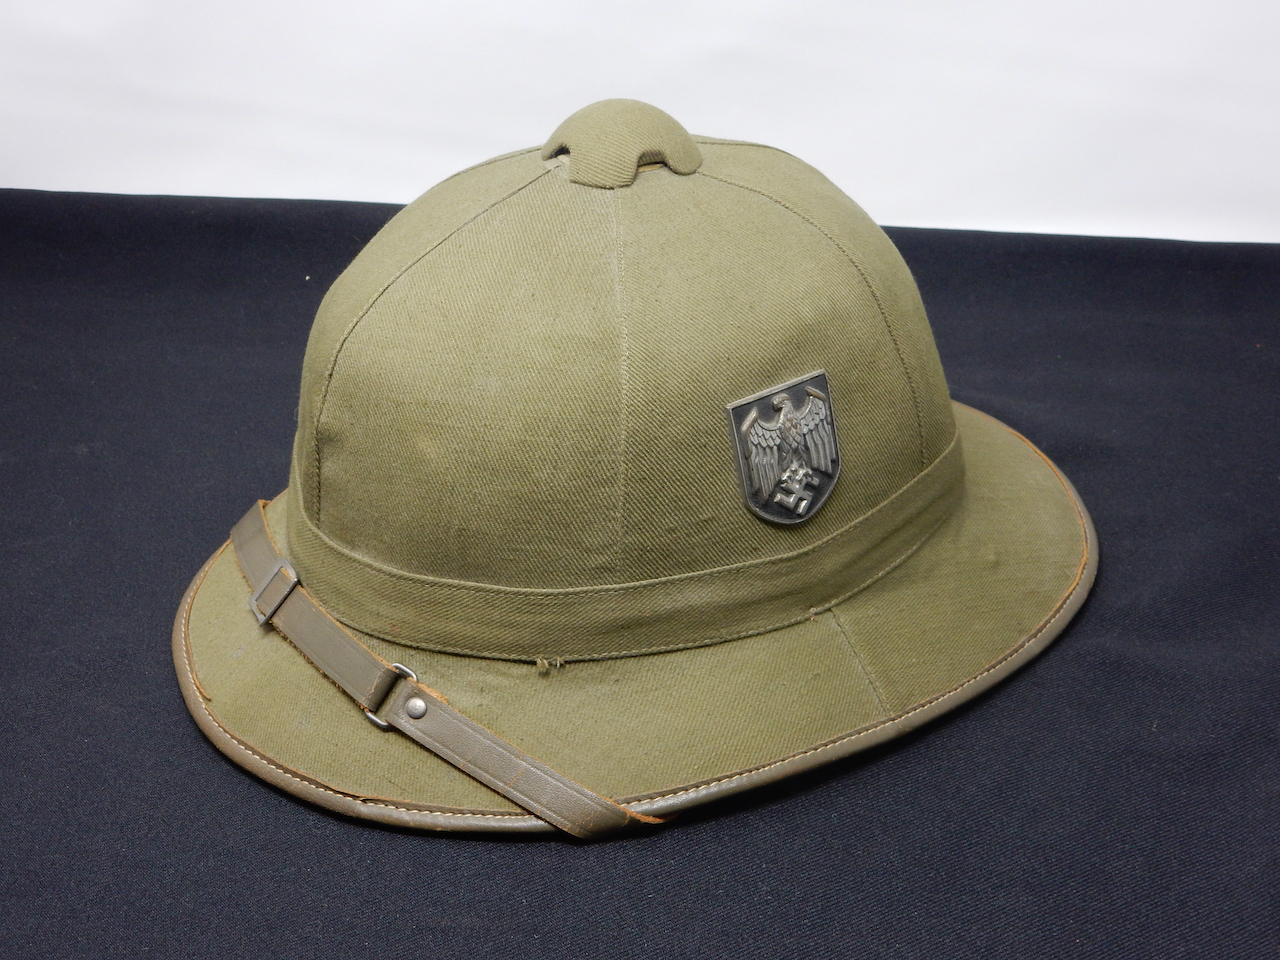 HO-276 First Pattern Tropical Pith Helmet – River Valley Militaria